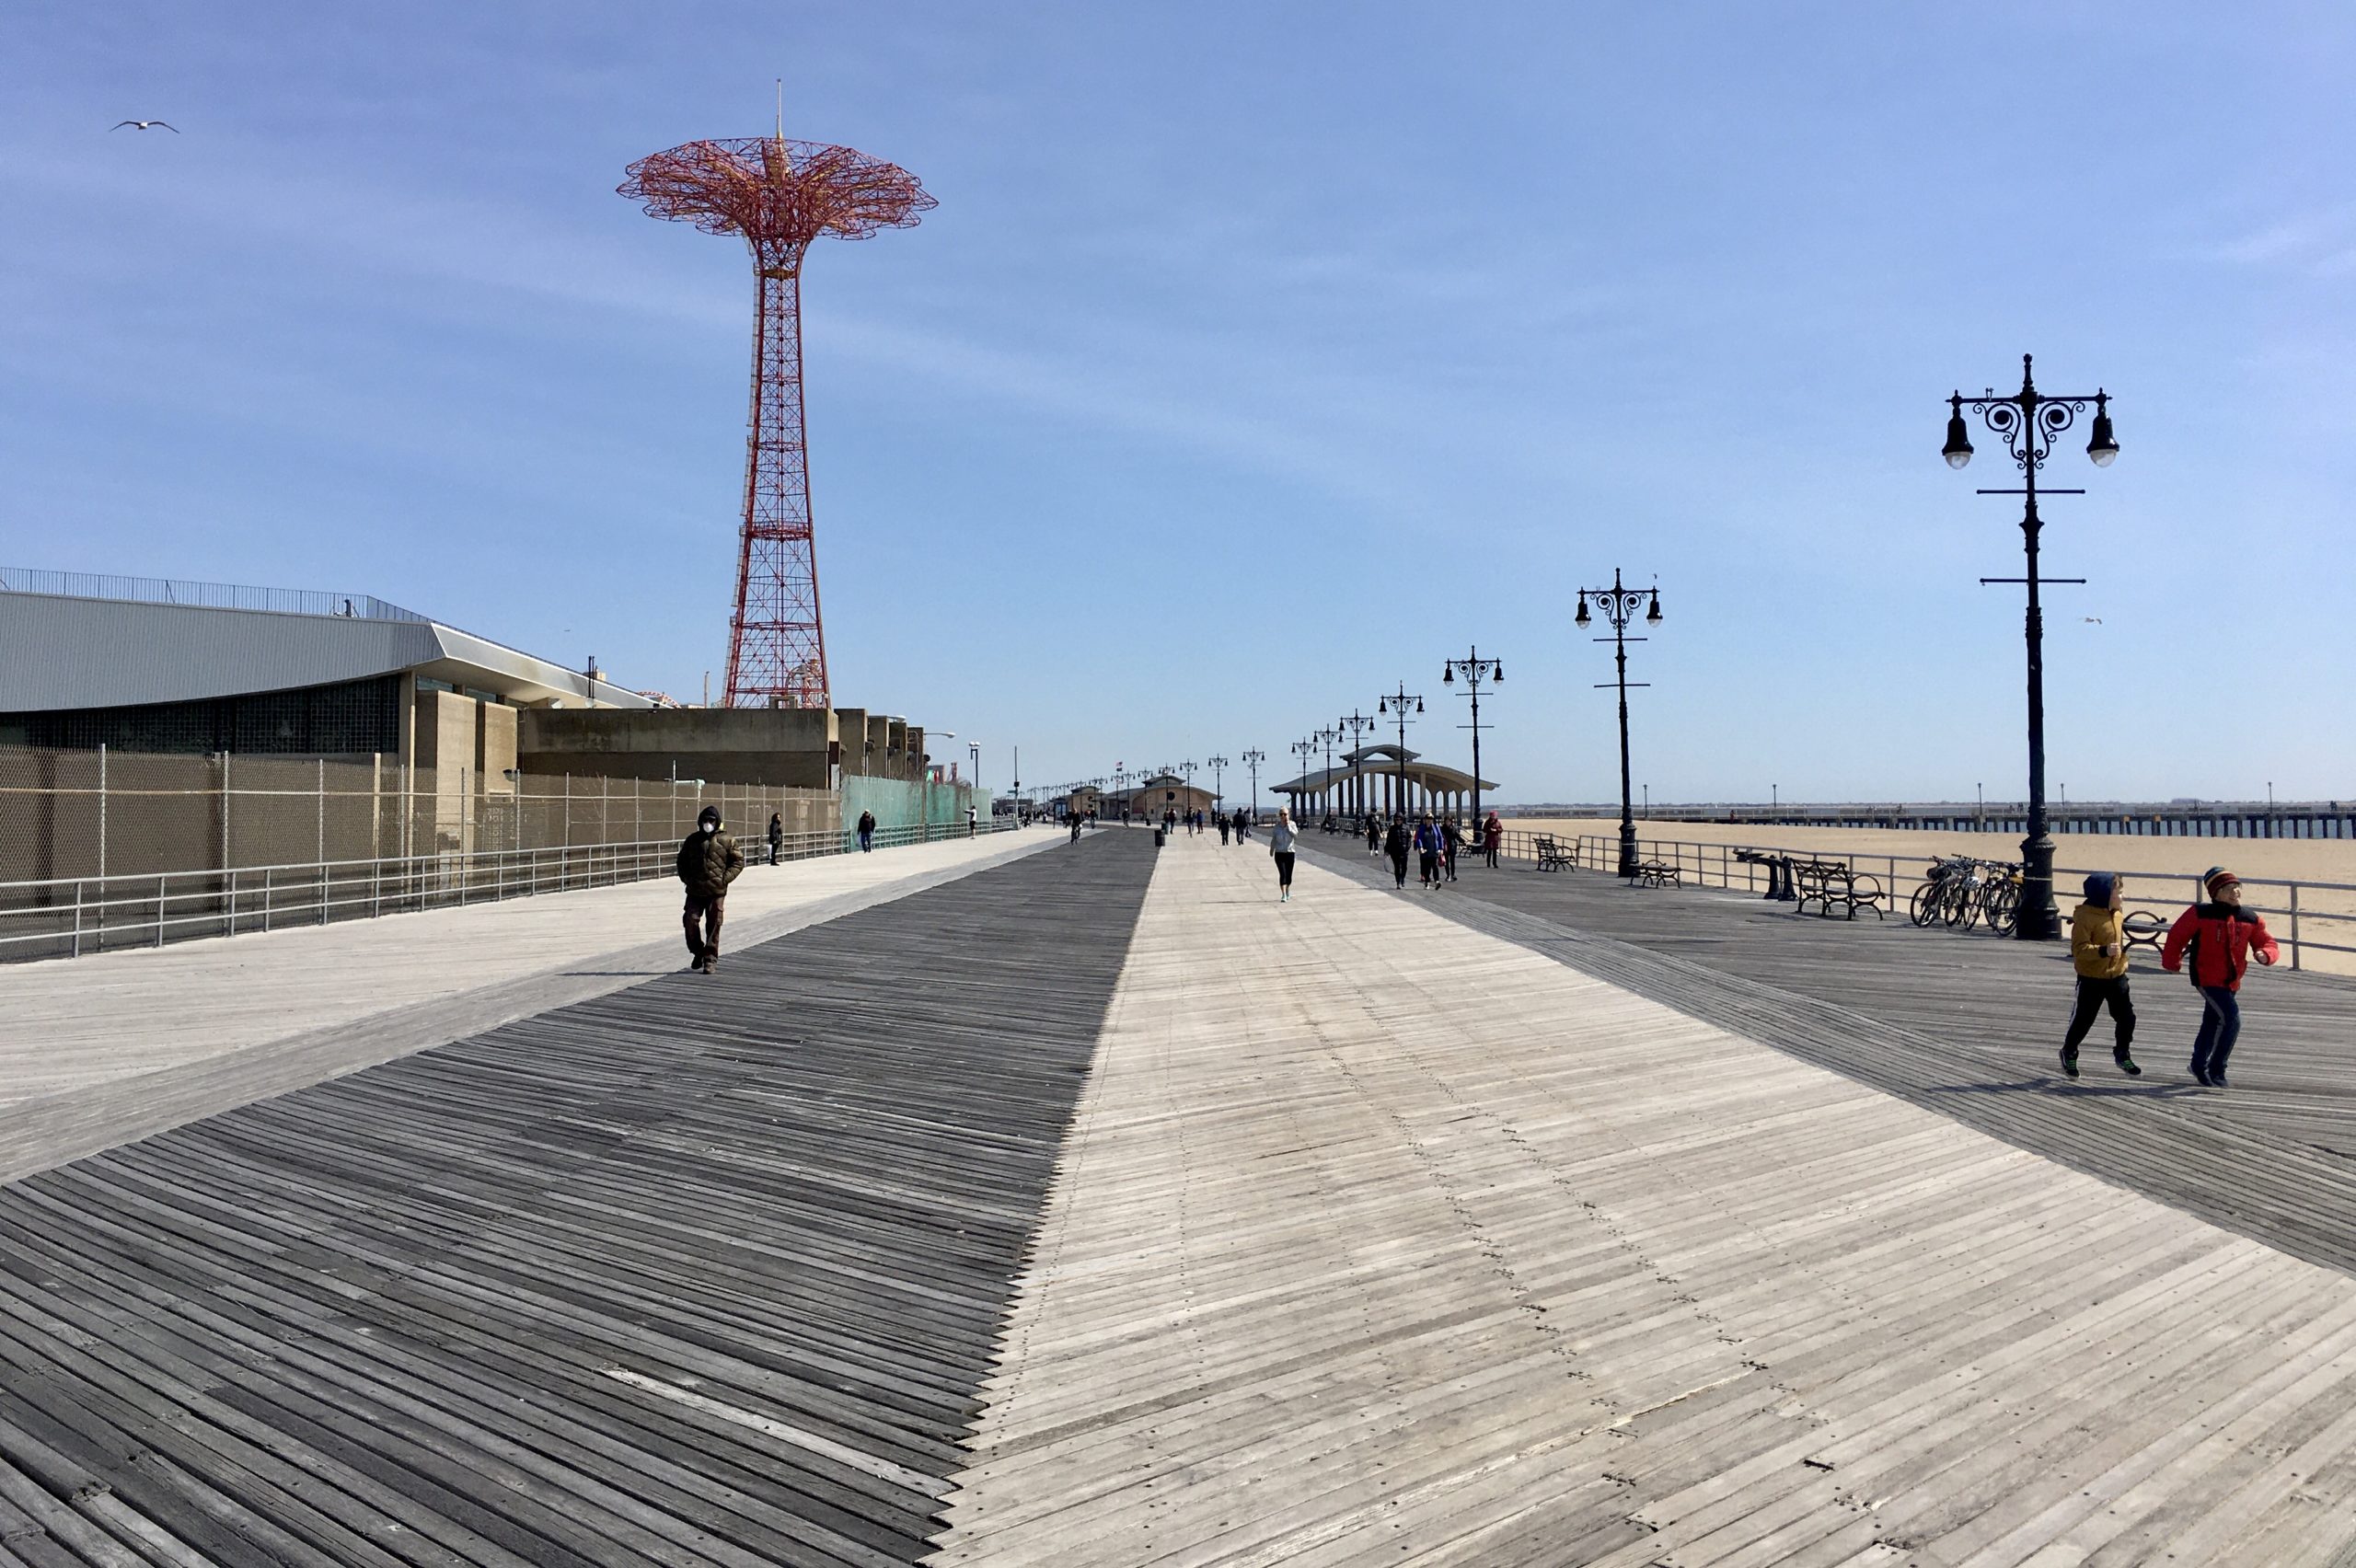 Visitors to the Coney Island Boardwalk practiced social distancing on Wednesday, March 18. Photo: Lore Croghan/Brooklyn Eagle